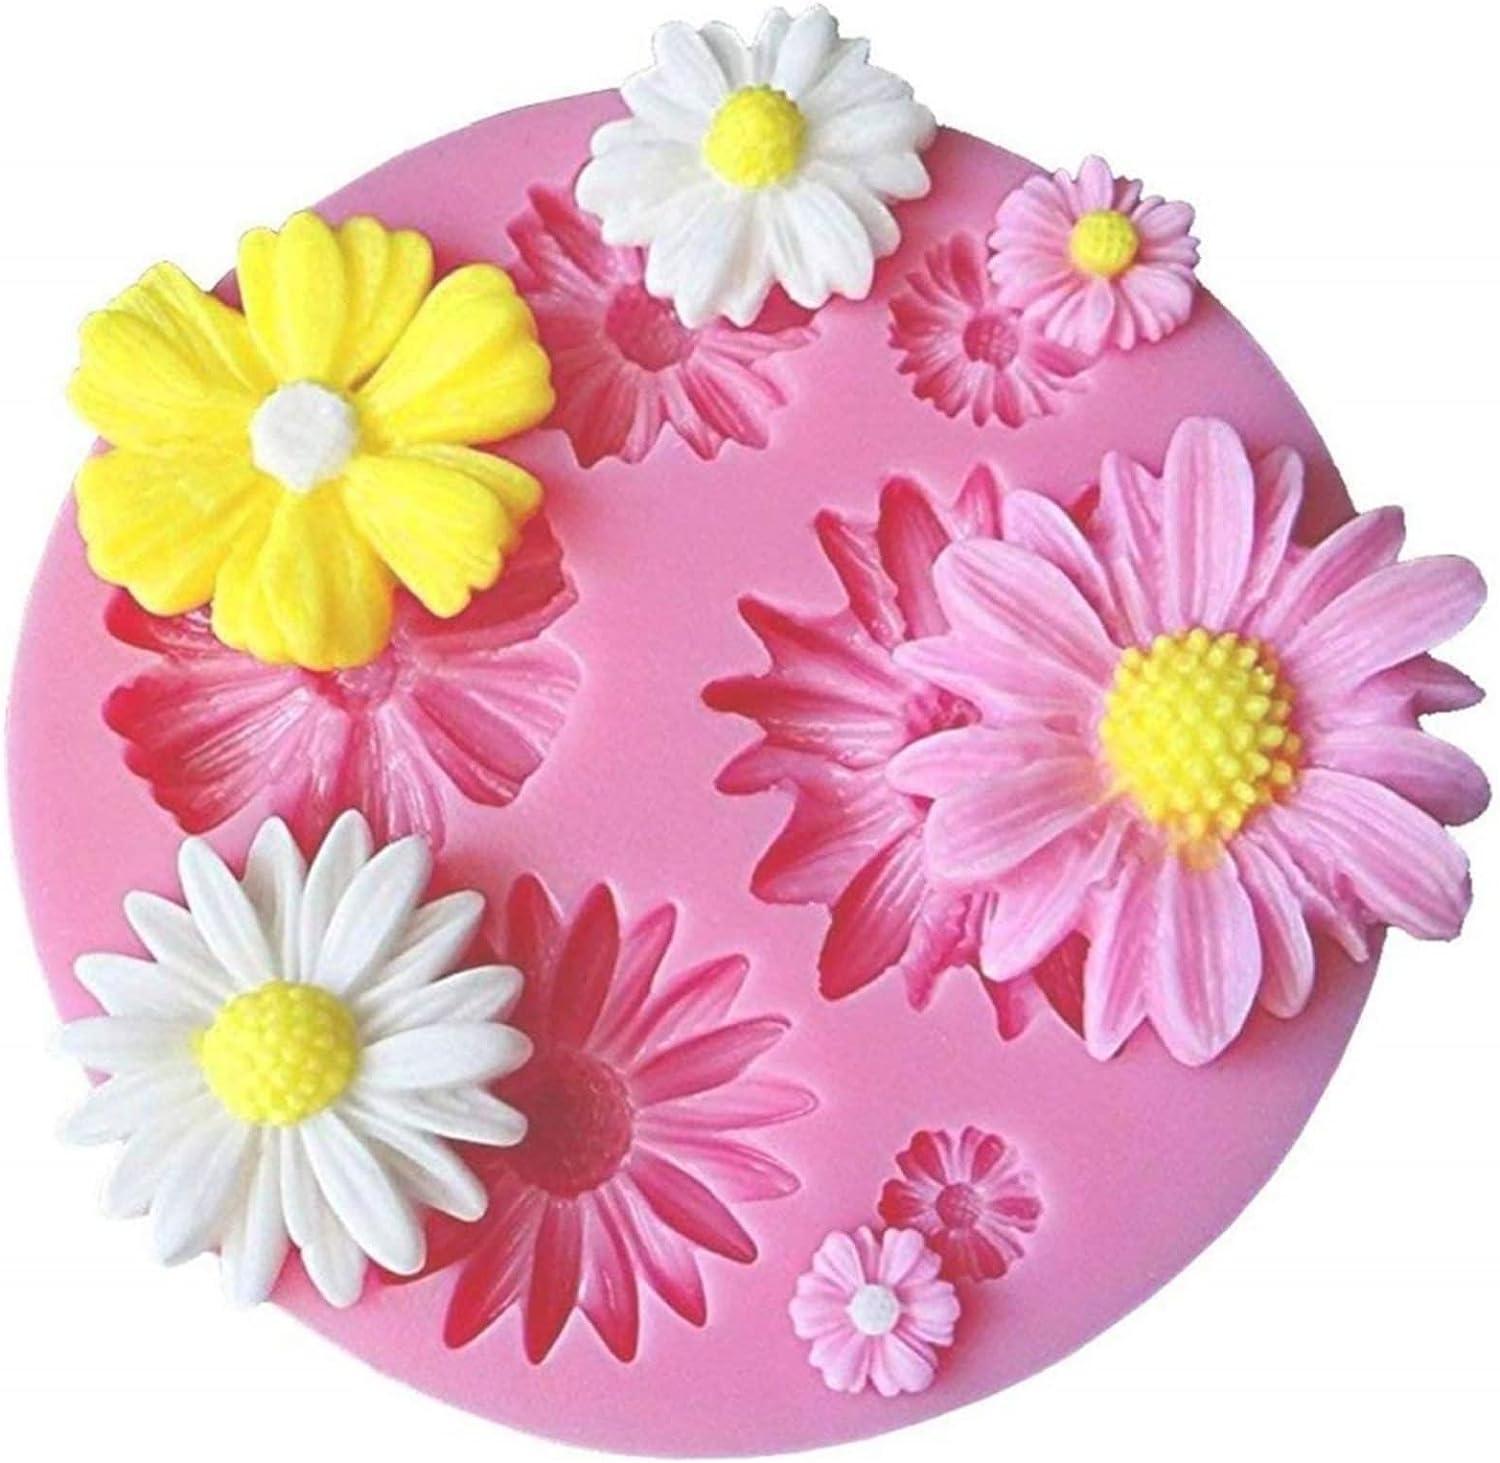 GELIFATLE Flower Fondant Cake Molds, Daisy, Rose, Chrysanthemum and Small  Flower Candy Silicone Molds for Chocolate Fondant Polymer Clay Soap  Crafting Projects & Cake Decoration (5pack) 